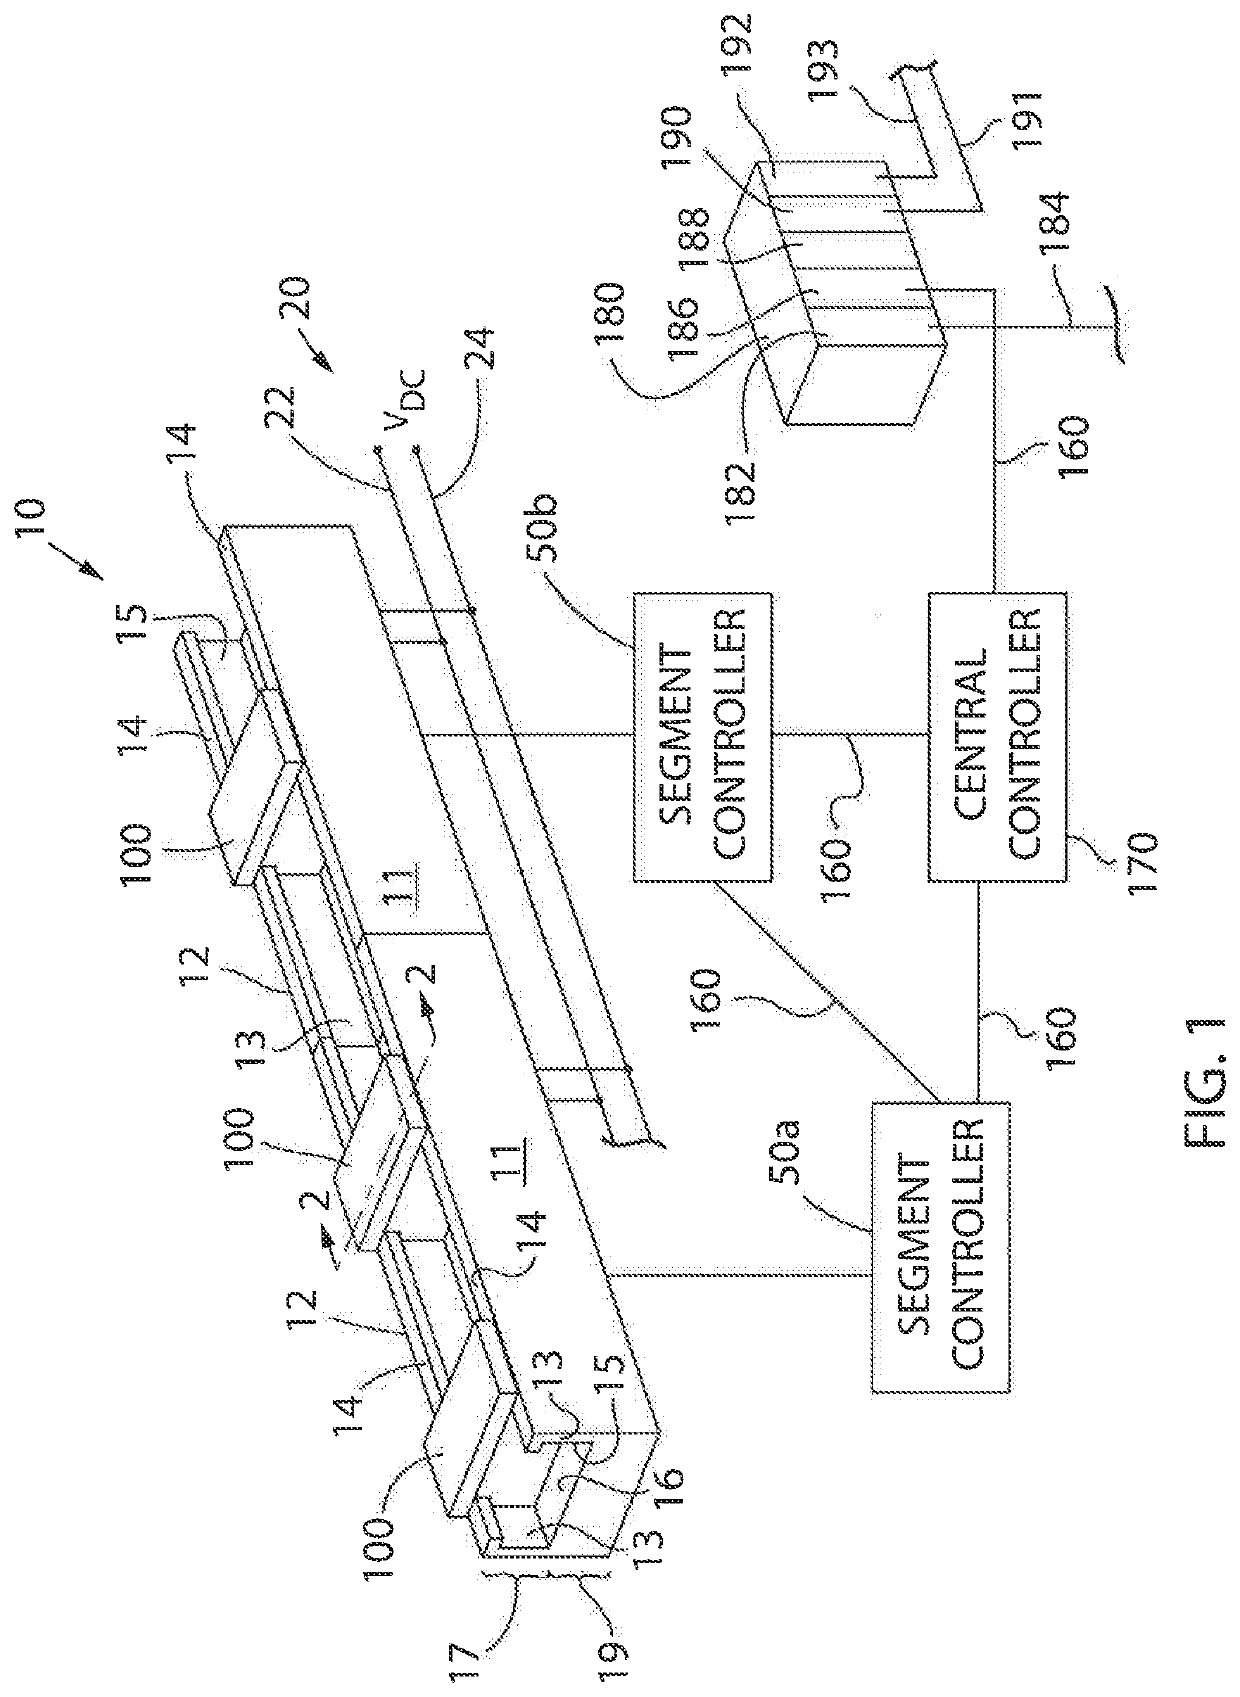 System and Method for Improving Travel Across Joints in a Track for a Linear Motion System